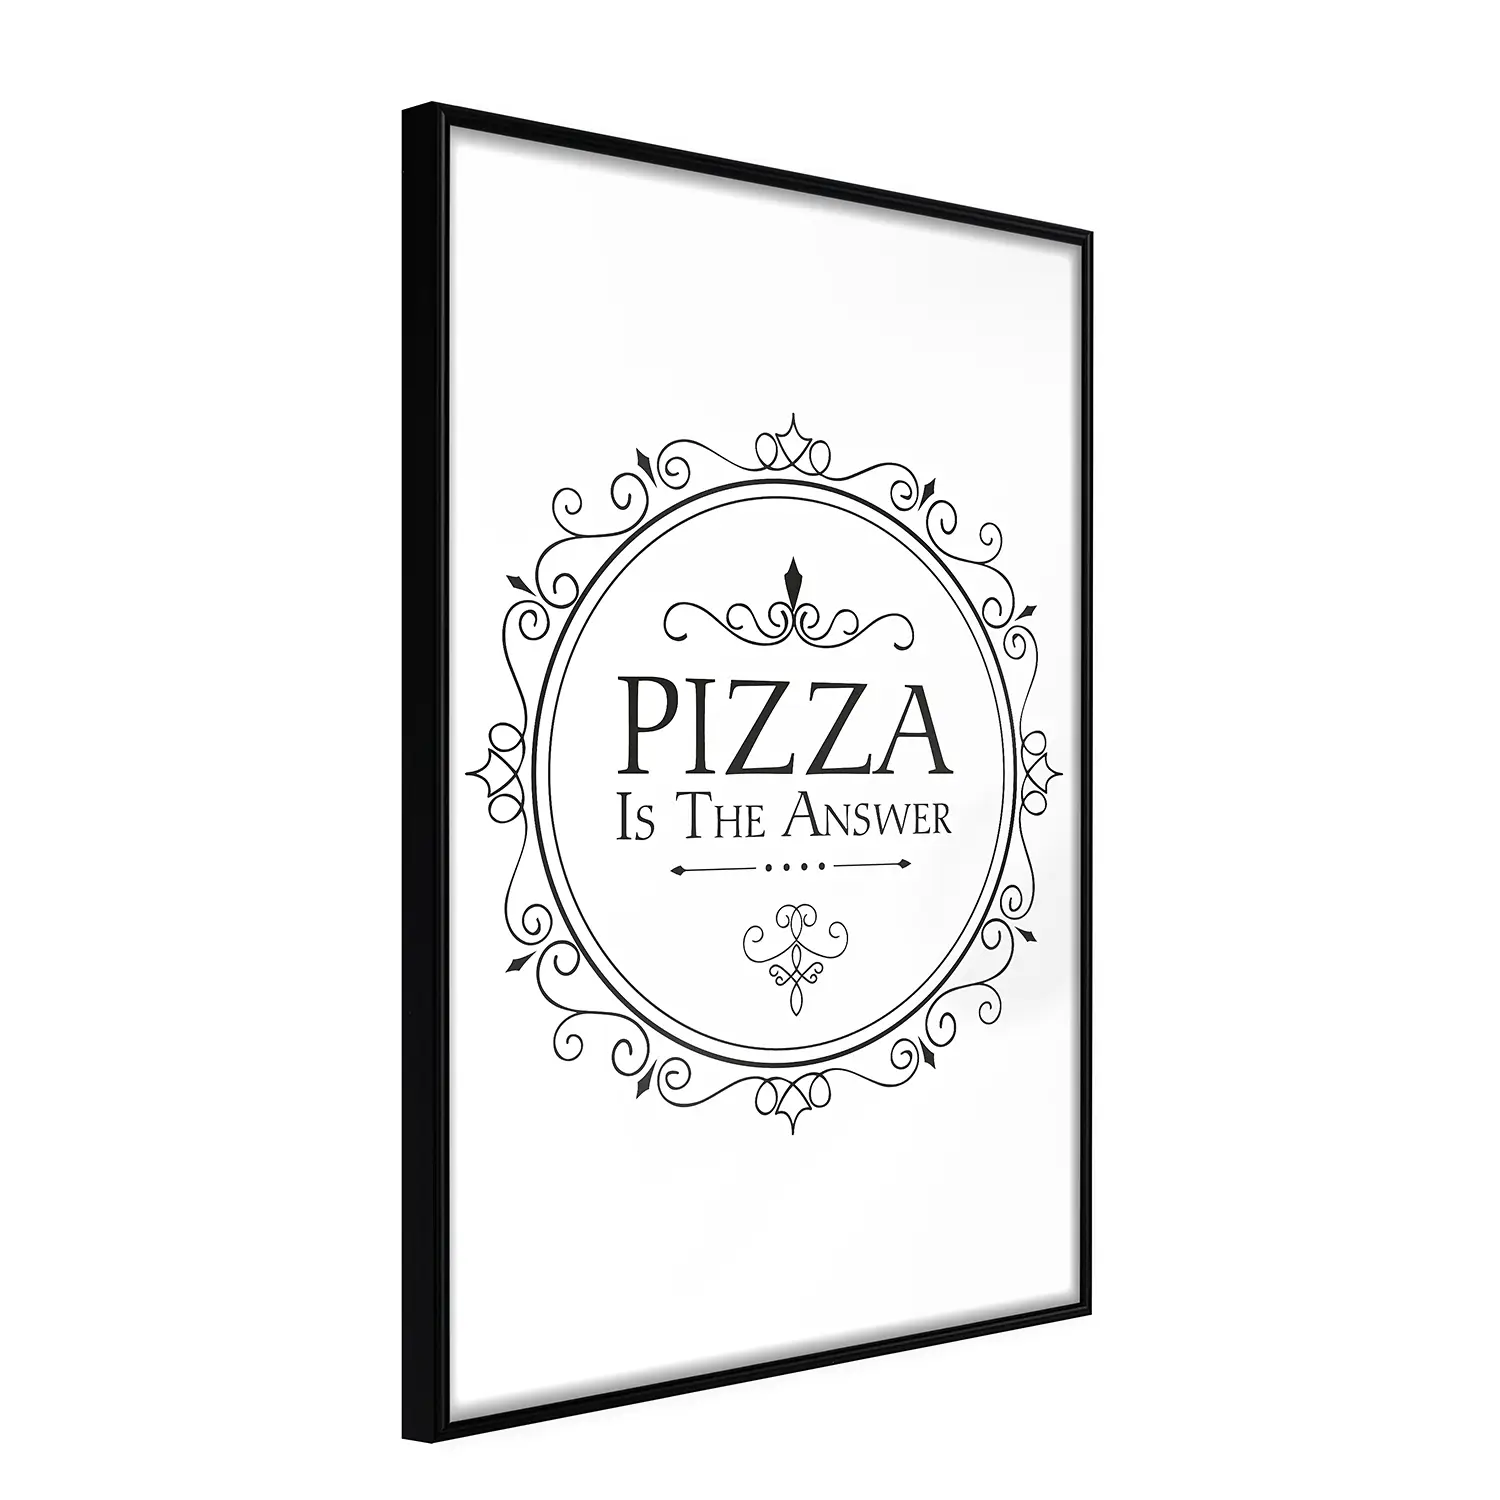 Pizza the Answer Poster is